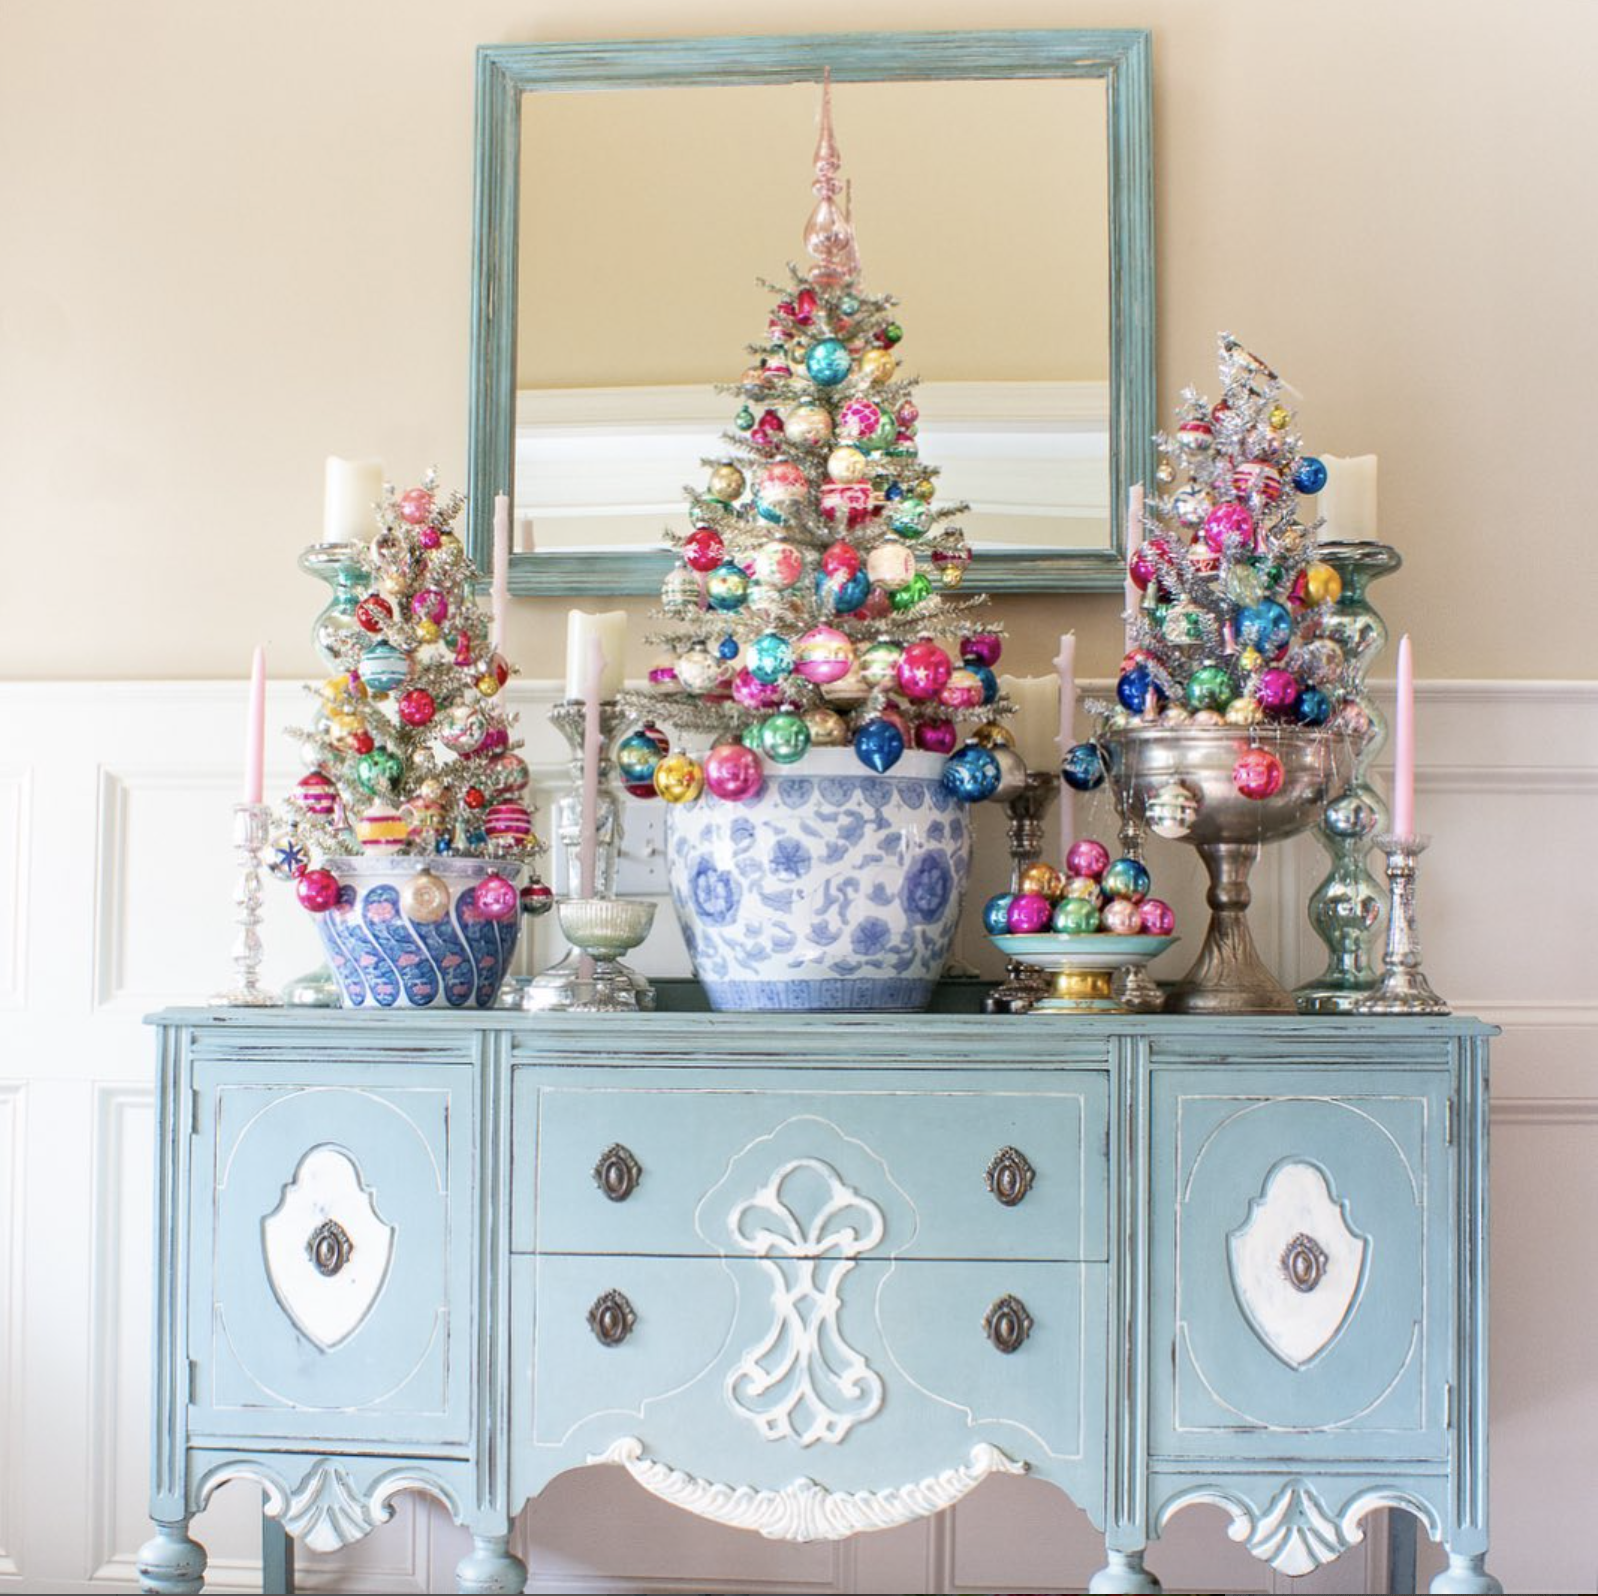 Tabletop tinsel trees covered in vintage Shiny Brite ornaments / kellyelko.com